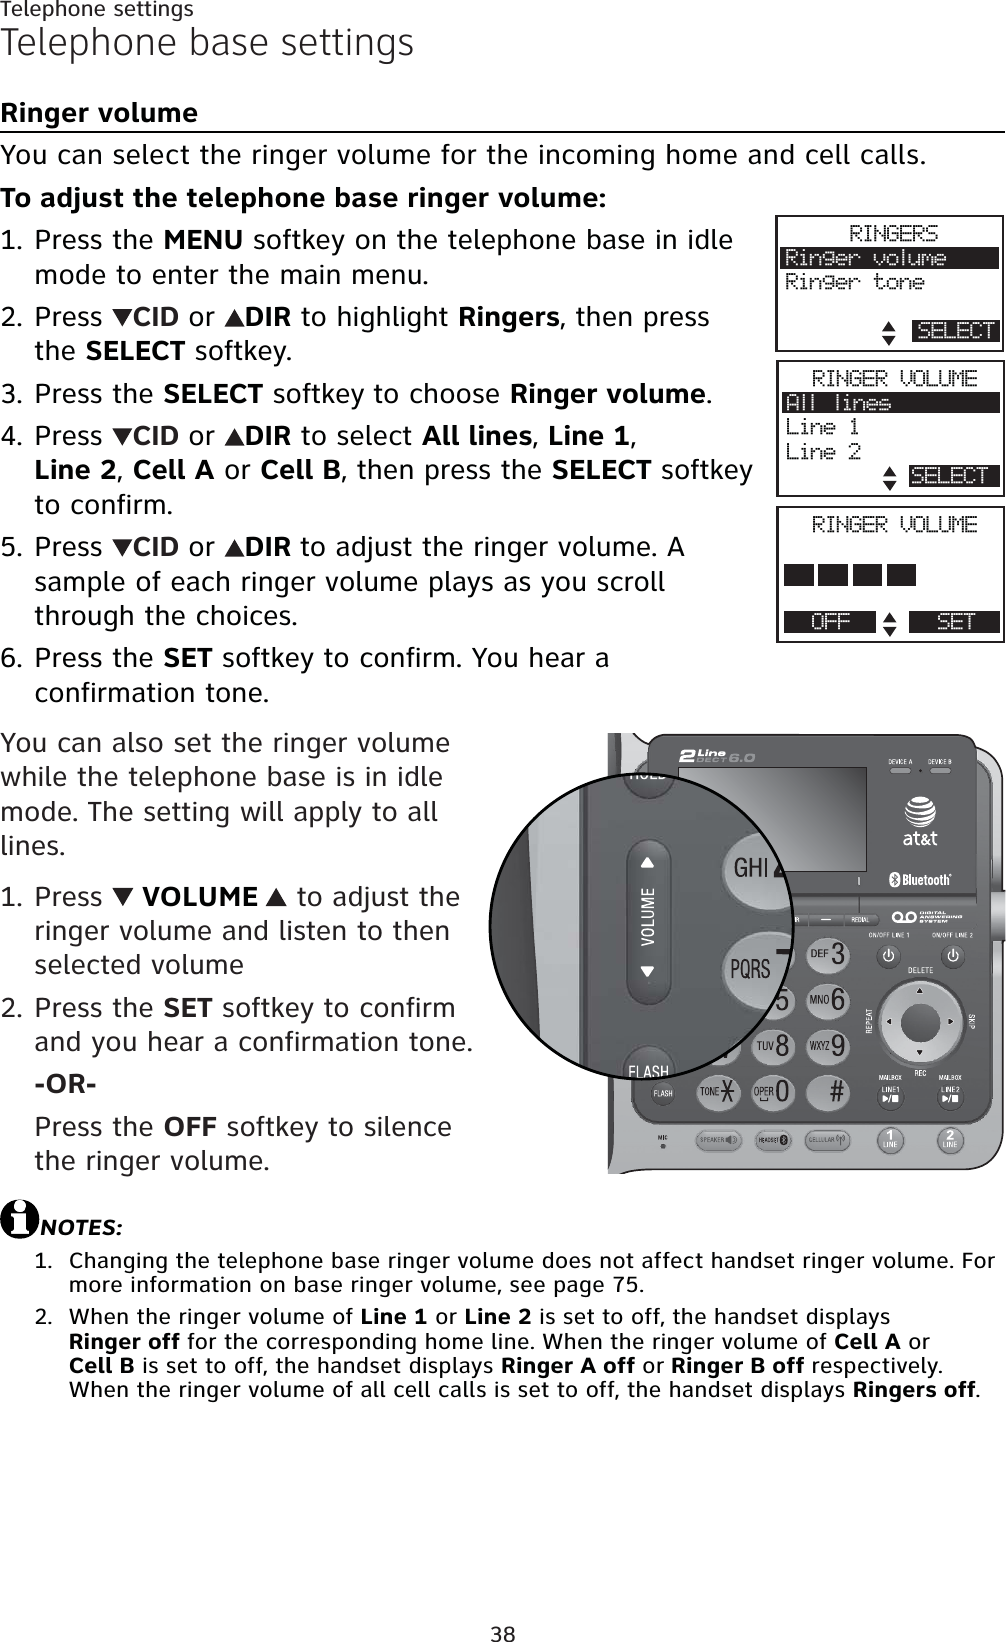 38Telephone settingsTelephone base settingsRinger volumeYou can select the ringer volume for the incoming home and cell calls. To adjust the telephone base ringer volume:Press the MENU softkey on the telephone base in idle mode to enter the main menu.Press  CID or DIR to highlight Ringers, then press the SELECT softkey.Press the SELECT softkey to choose Ringer volume.Press  CID or DIR to select All lines,Line 1,Line 2,Cell A or Cell B, then press the SELECT softkeyto confirm.Press  CID or DIR to adjust the ringer volume. A sample of each ringer volume plays as you scroll through the choices.Press the SET softkey to confirm. You hear a confirmation tone.You can also set the ringer volume while the telephone base is in idle mode. The setting will apply to all lines.Press   VOLUME  to adjust the ringer volume and listen to then selected volumePress the SET softkey to confirm and you hear a confirmation tone.-OR-Press the OFF softkey to silence the ringer volume.NOTES:Changing the telephone base ringer volume does not affect handset ringer volume. For more information on base ringer volume, see page 75.When the ringer volume of Line 1 or Line 2 is set to off, the handset displays Ringer off for the corresponding home line. When the ringer volume of Cell A or Cell B is set to off, the handset displays Ringer A off or Ringer B off respectively. When the ringer volume of all cell calls is set to off, the handset displays Ringers off.1.2.3.4.5.6.1.2.1.2.RINGERSRinger volumeRinger toneSELECTRINGER VOLUMEAll linesLine 1Line 2SELECTRINGER VOLUMEPhone memoryOFF SET